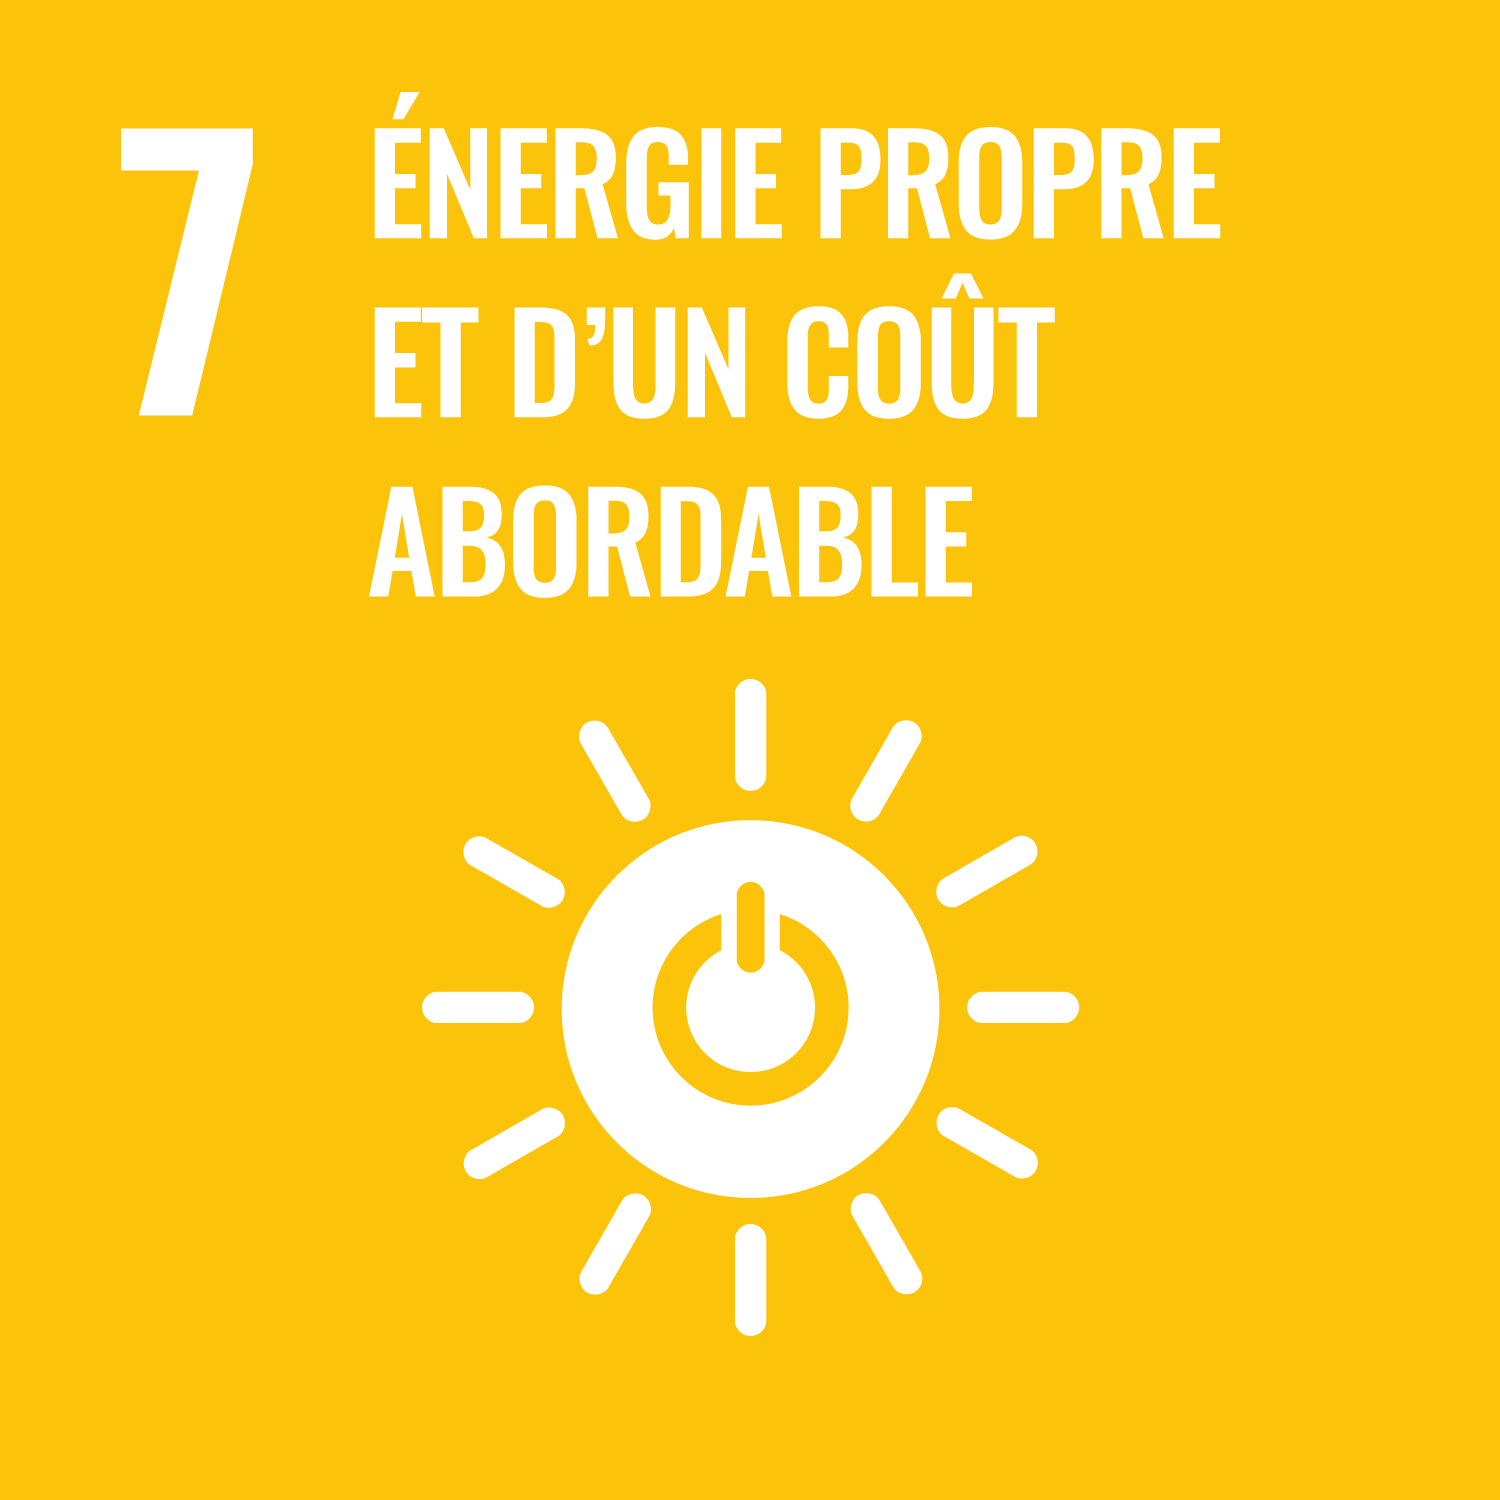 UN Compact Goal 7 Icon "Affordable and Clean Engery"